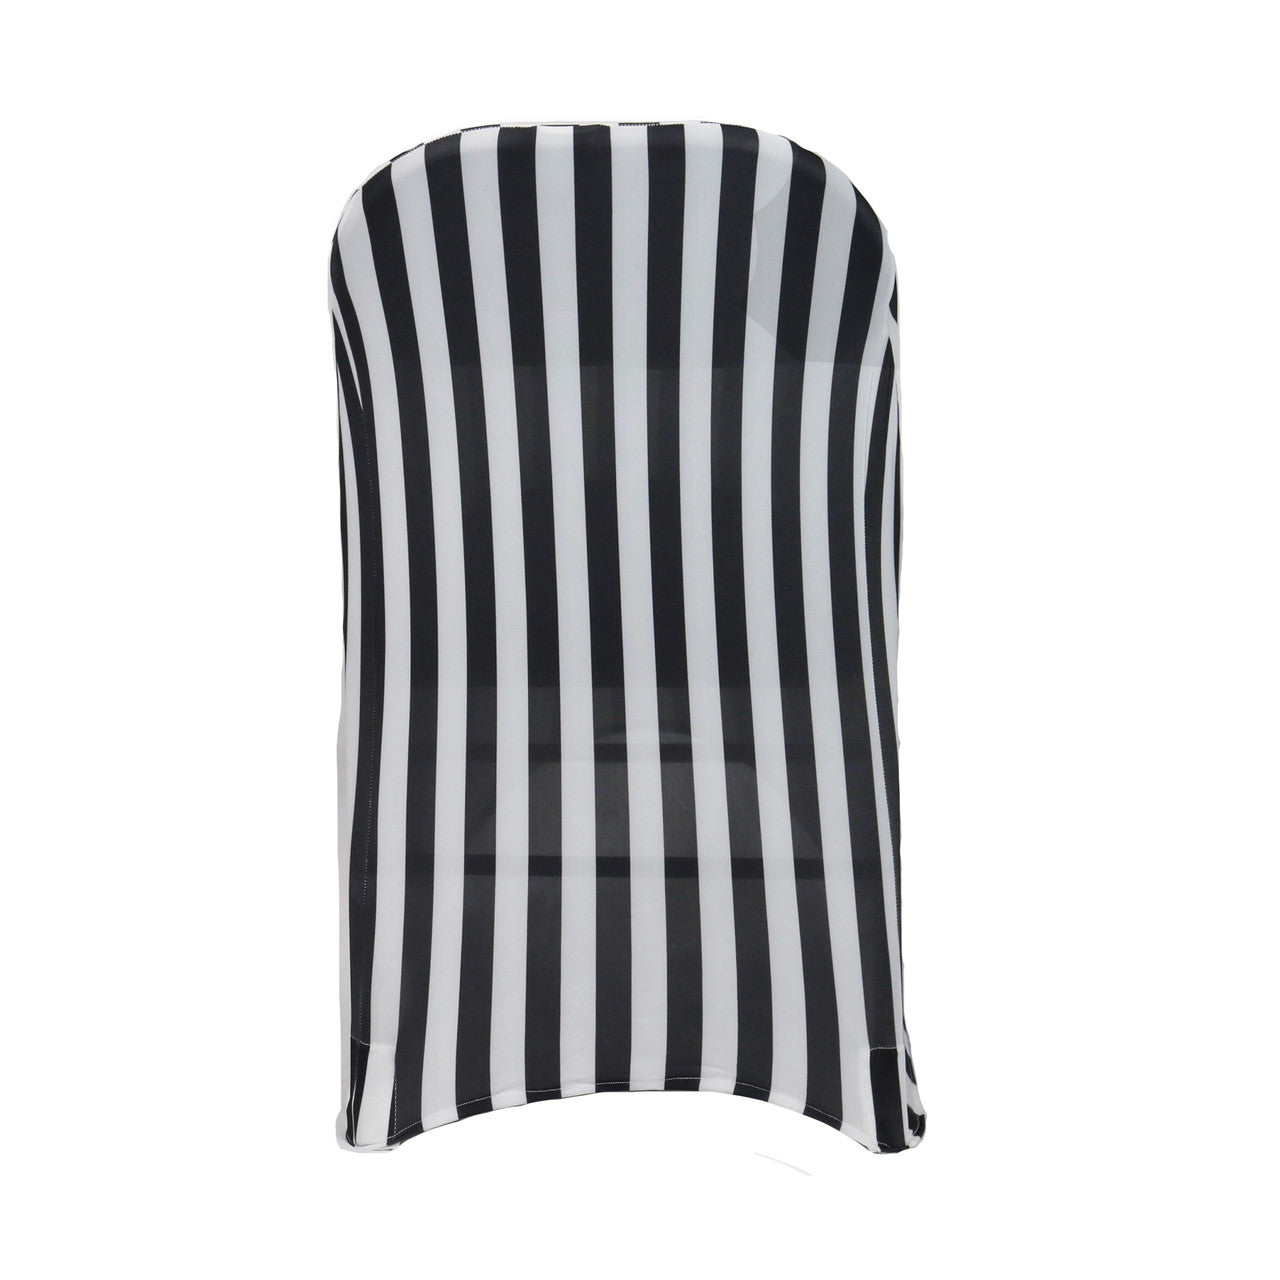 Print Spandex Folding Chair Cover in Black and White Striped